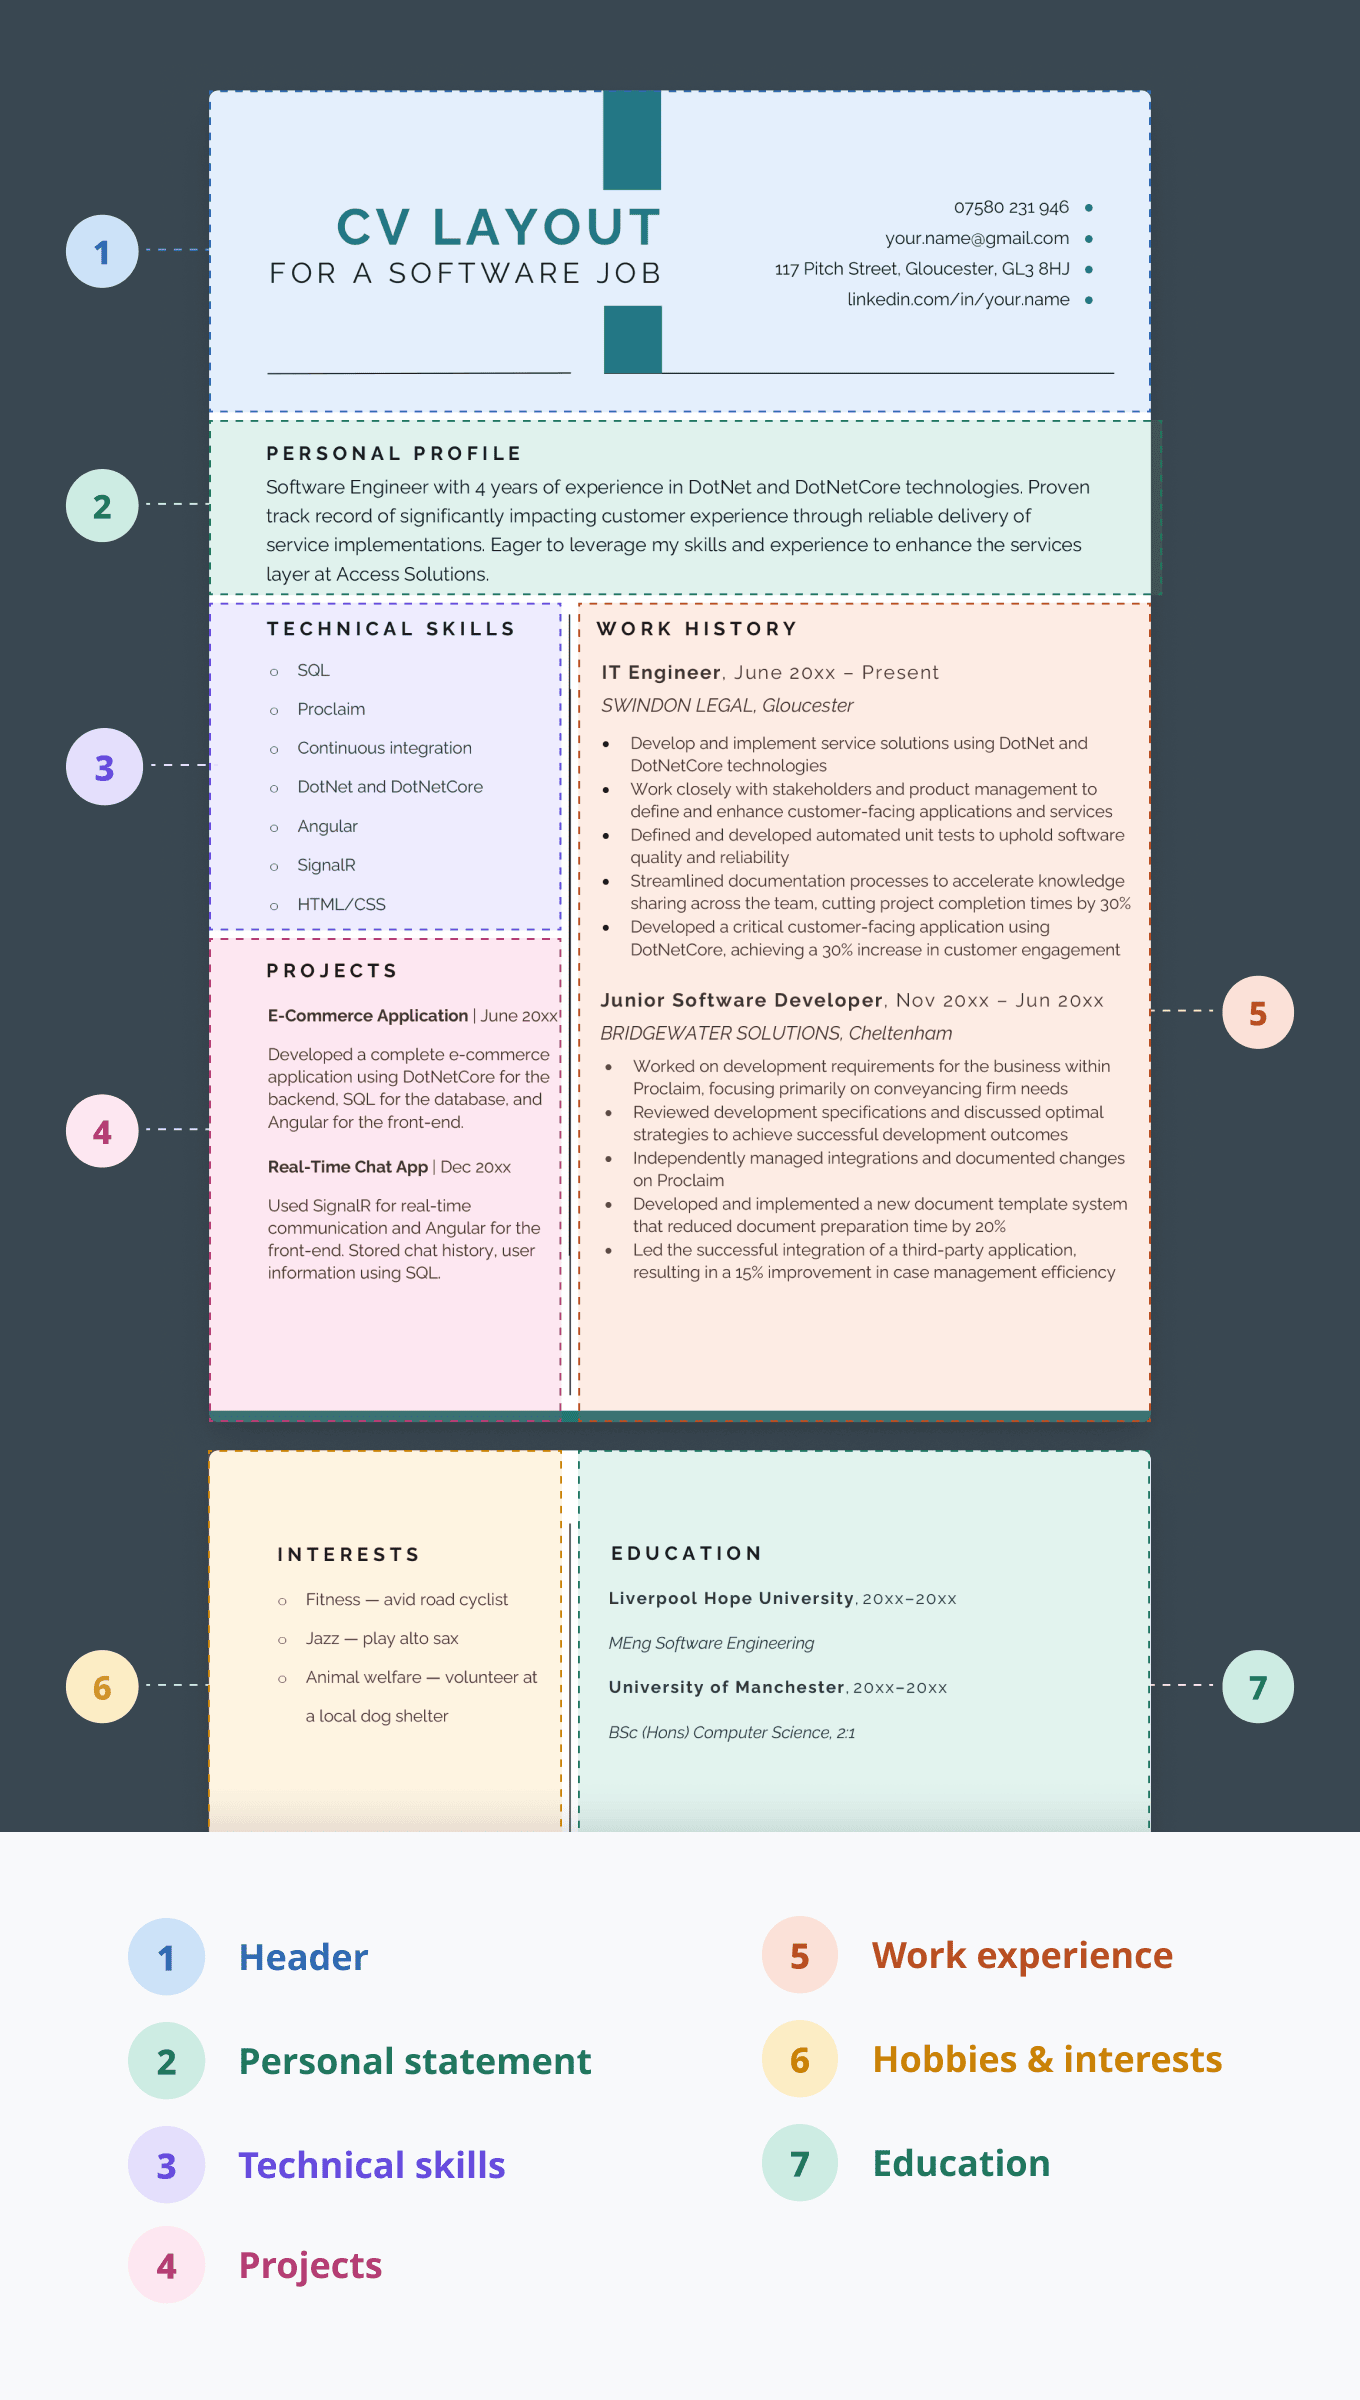 A perfect CV layout for an IT or tech job. The CV includes prominent projects and skills sections to help the applicant demonstrate their technical skills to employers. 